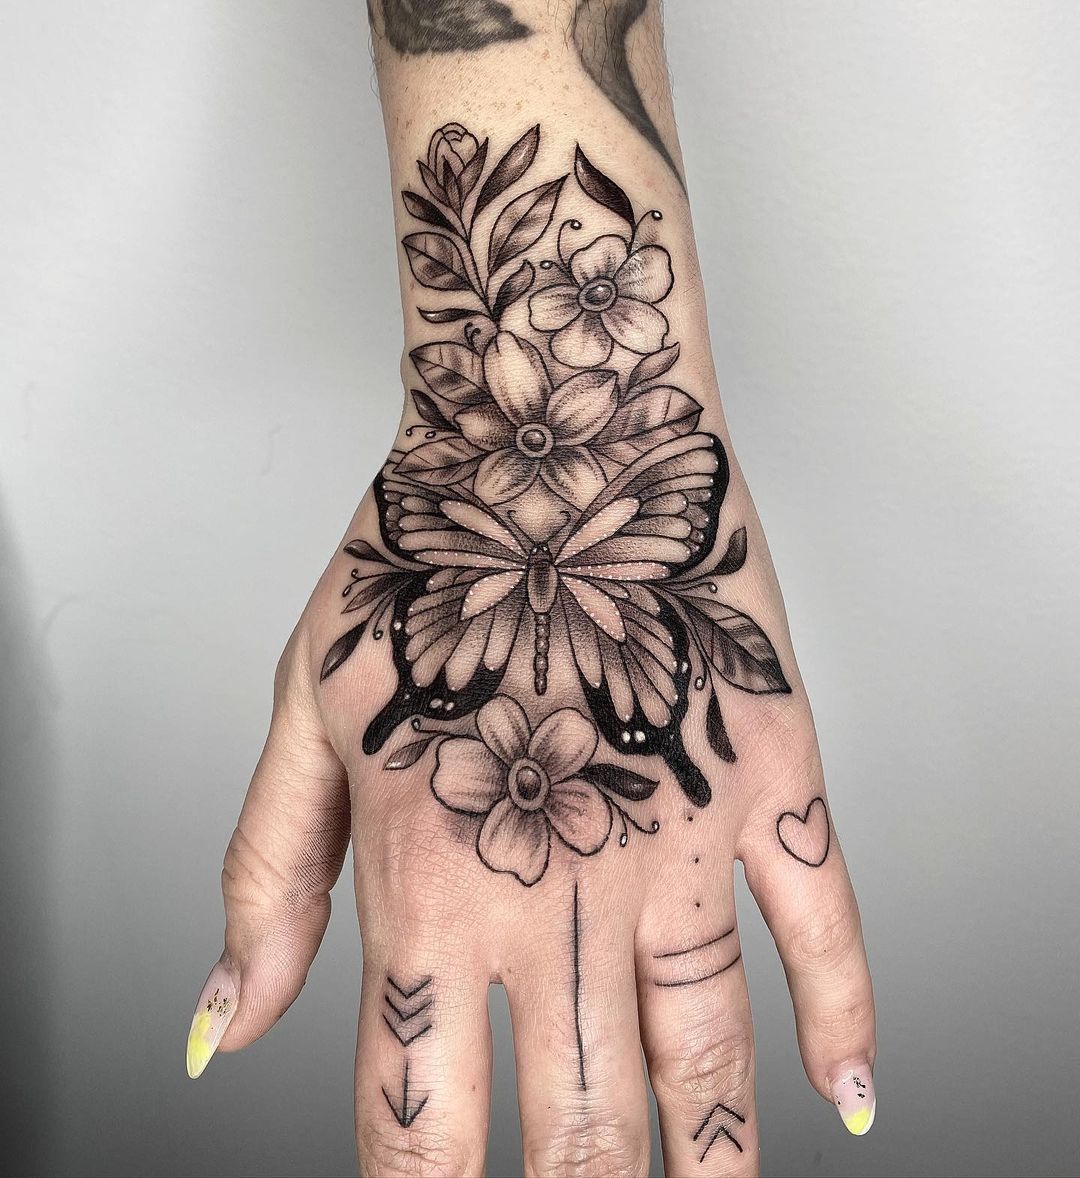 Stunning Butterfly tattoo on hand for girl